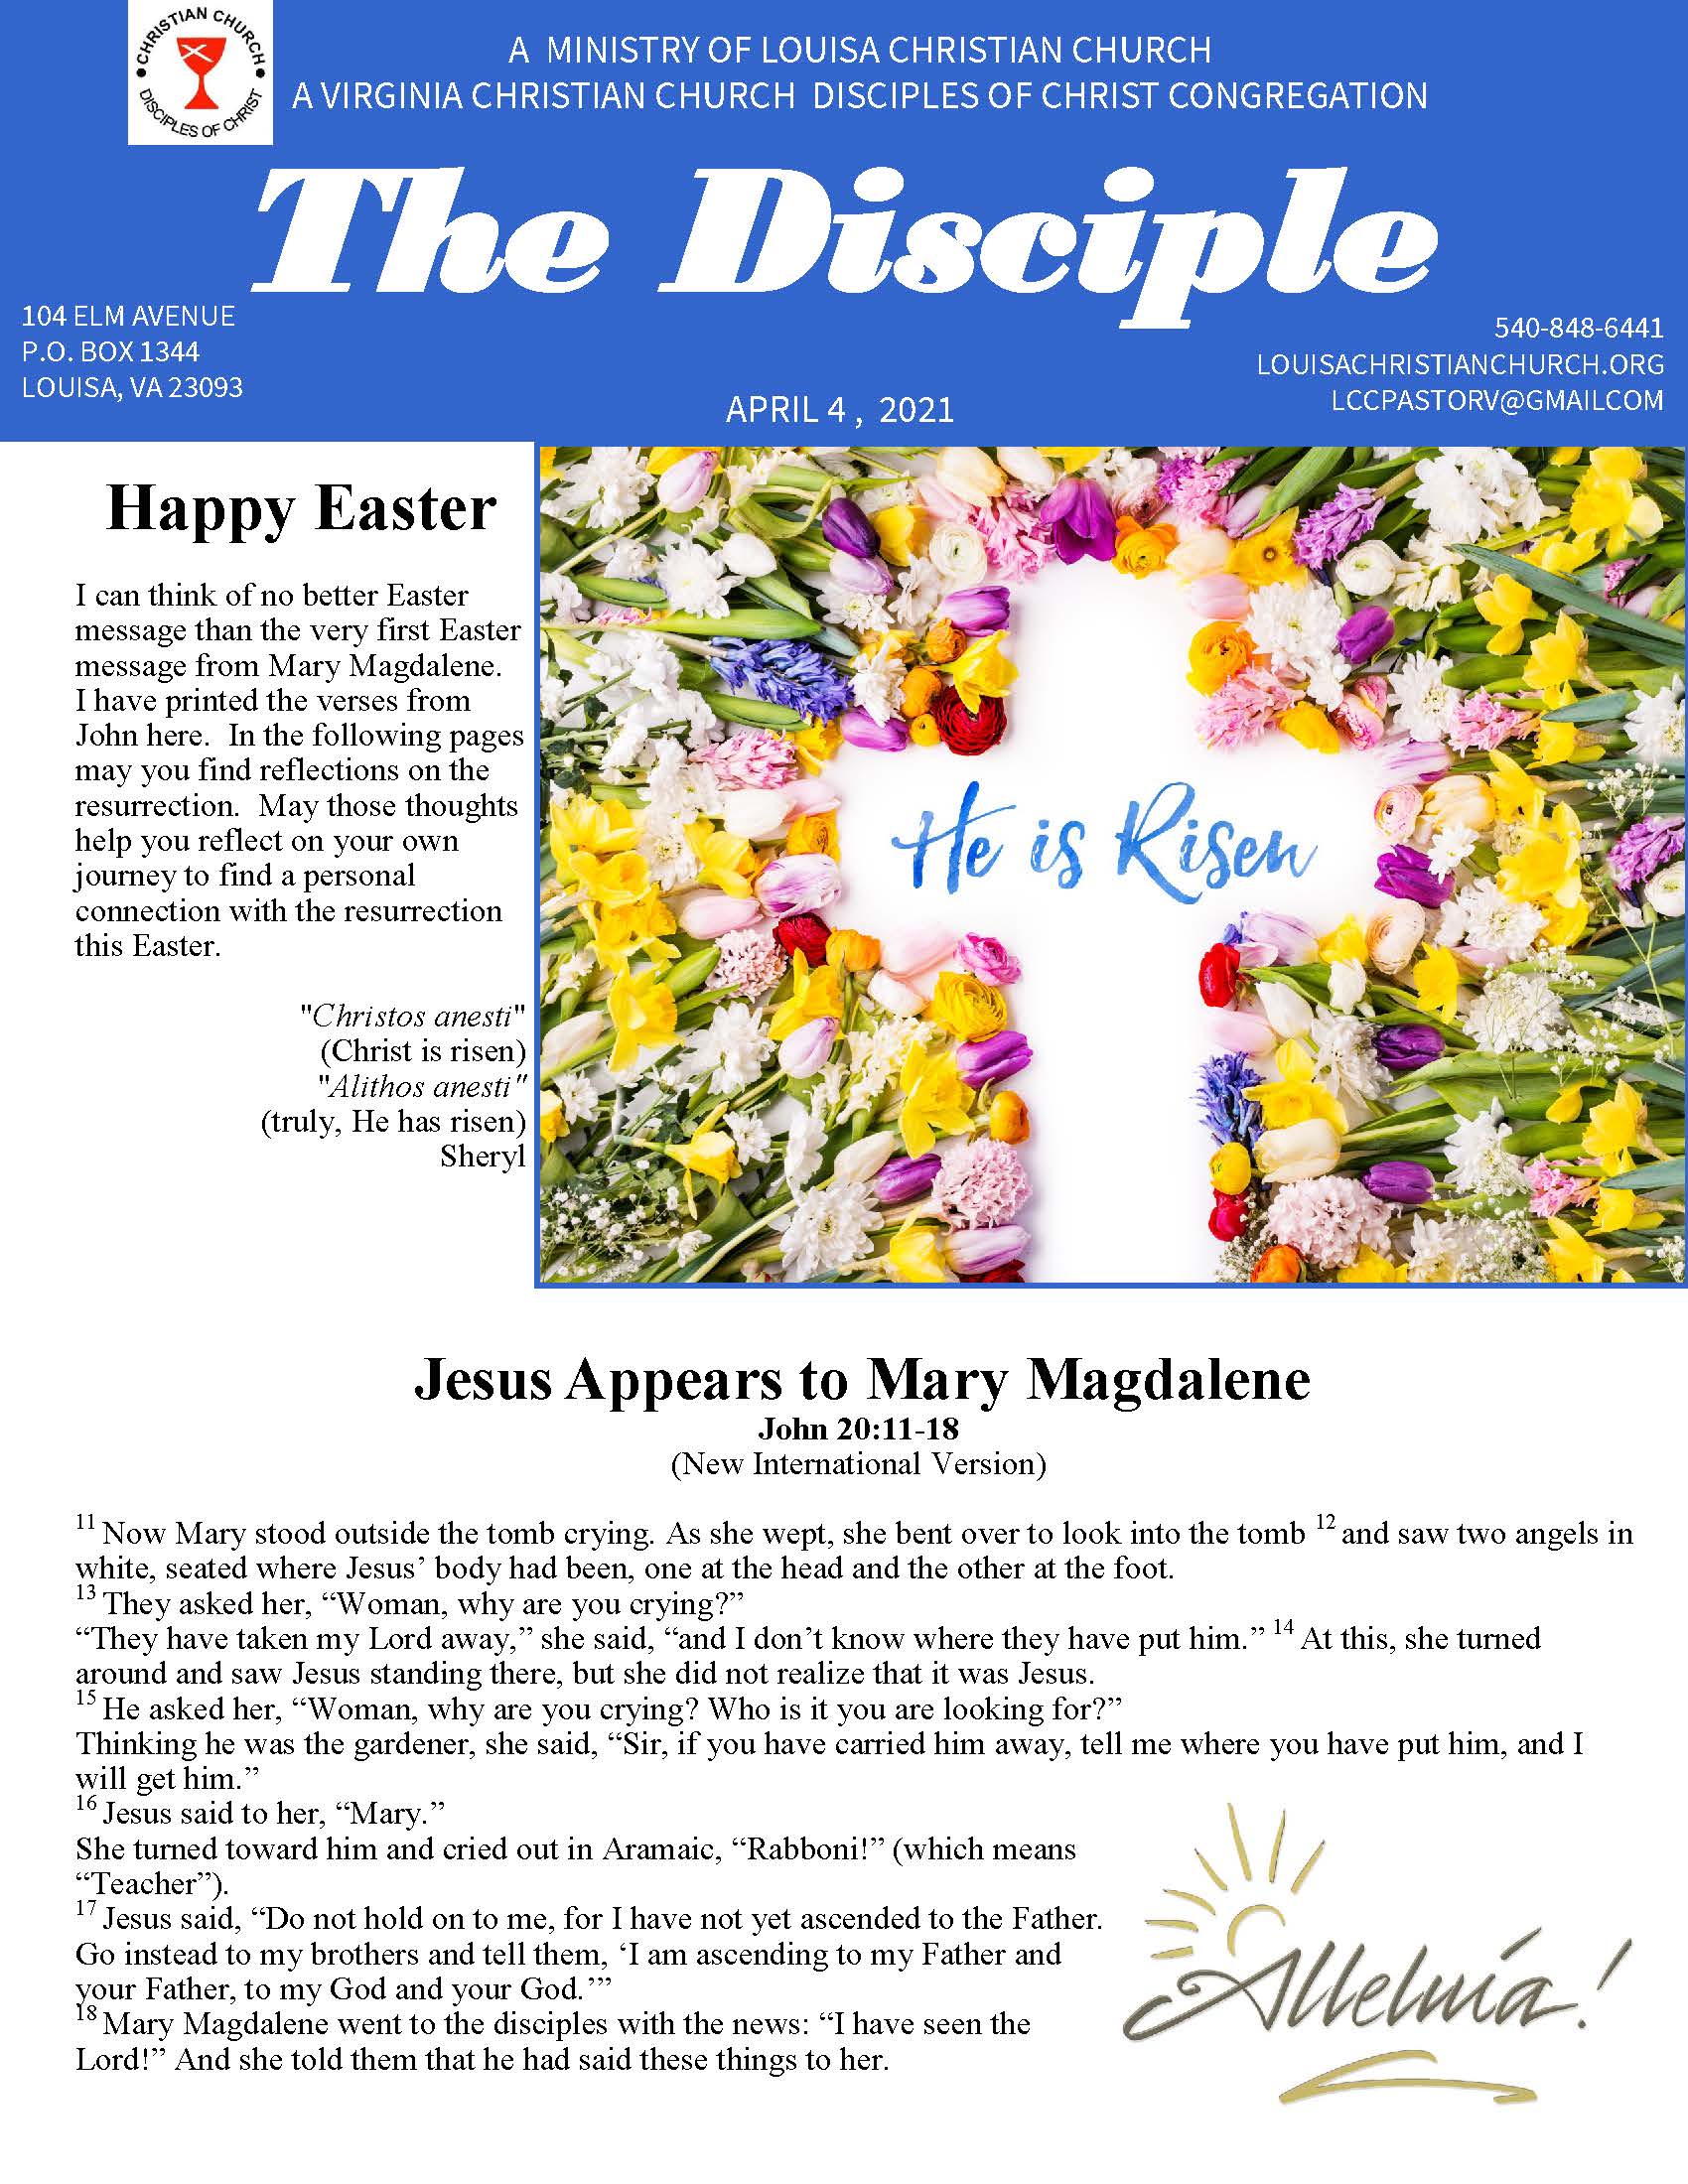 April 4 Newsletter_Page_1